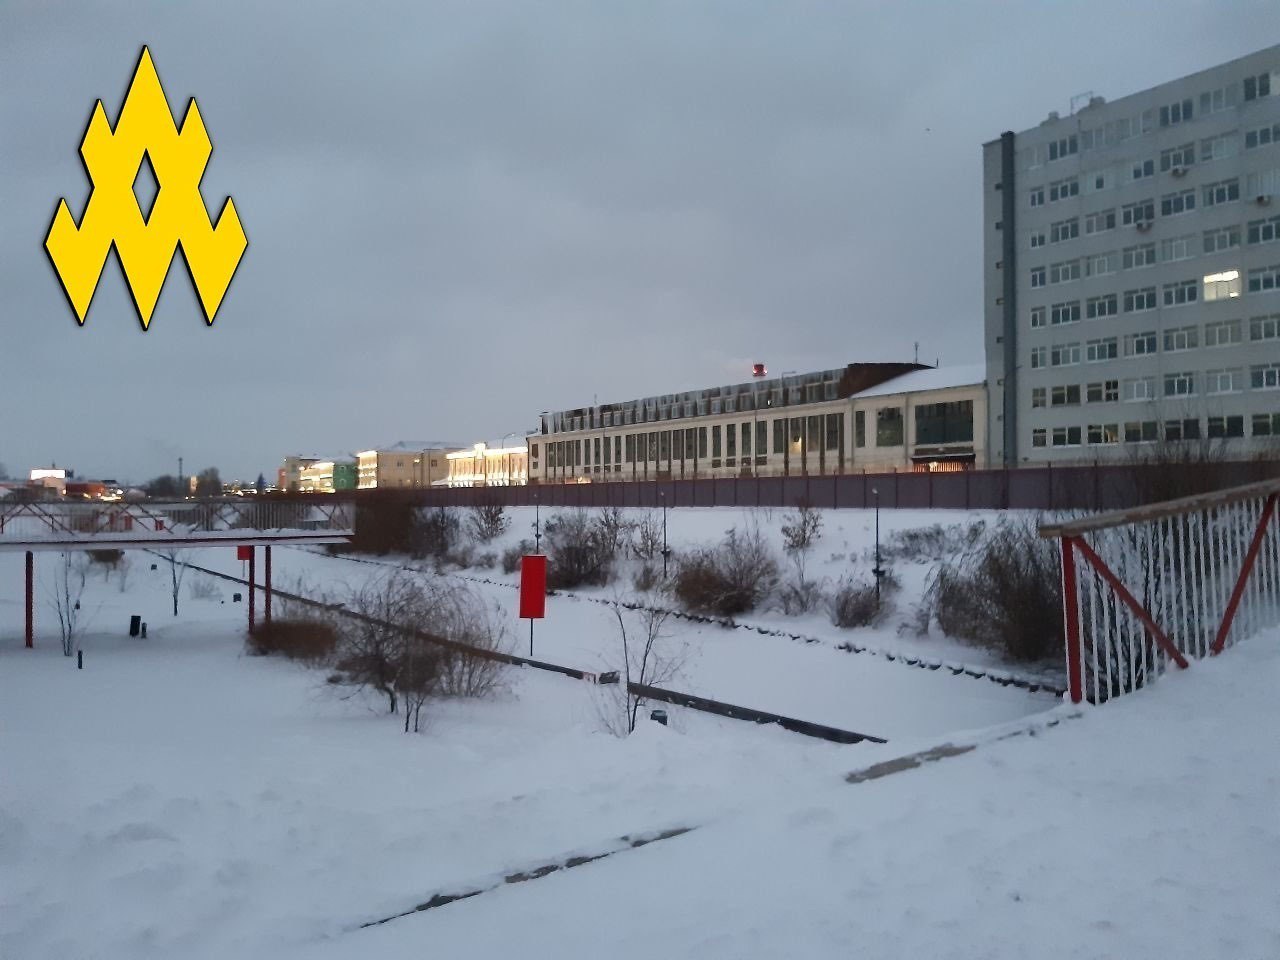 Ukrainian Partisans Infiltrate Tula Arms Plant in russia, Defense Express